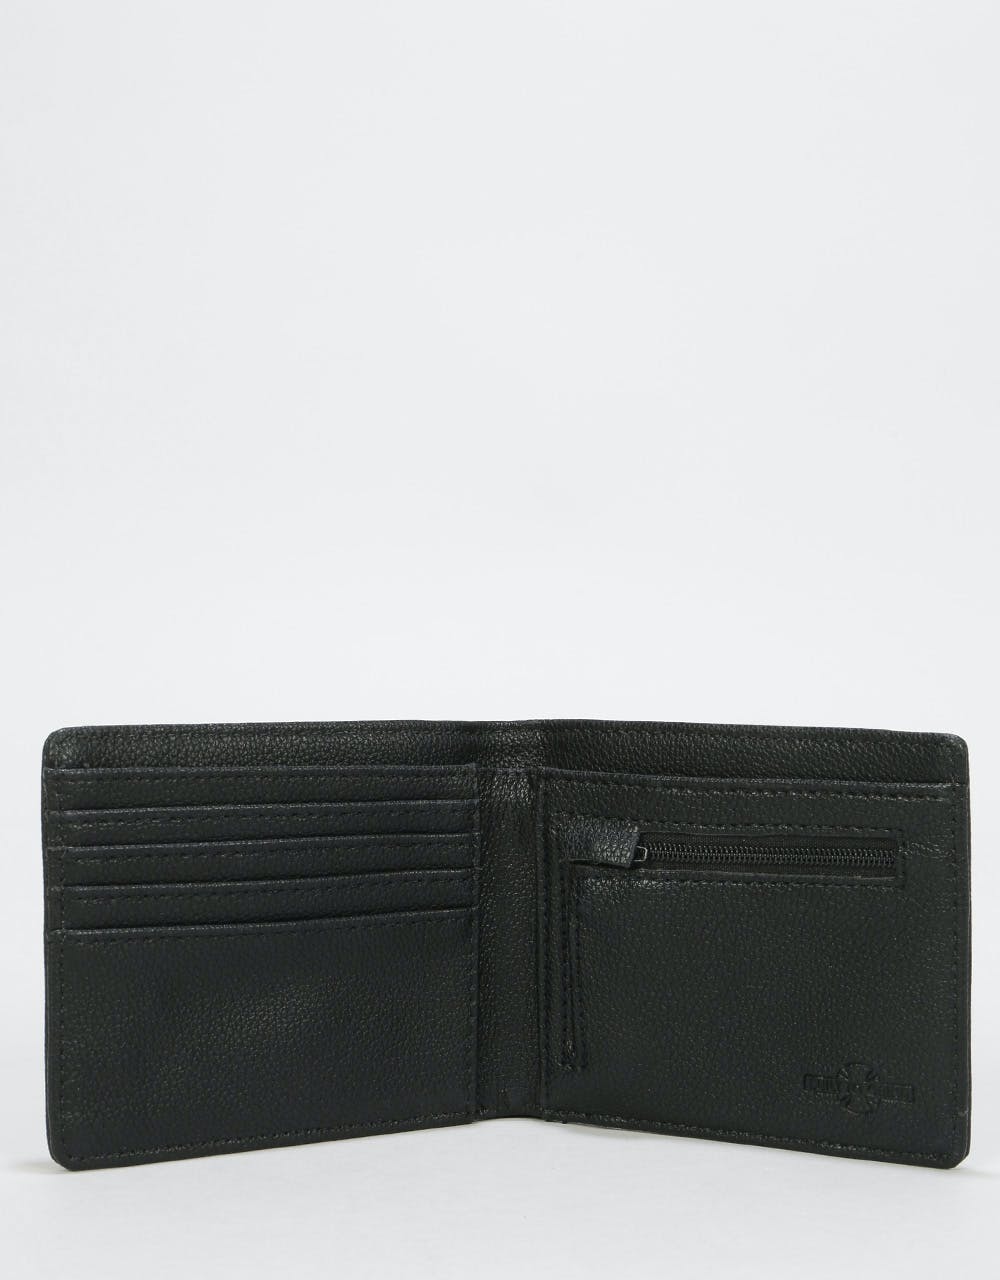 Independent O.G.B.C Repeat Wallet - Black